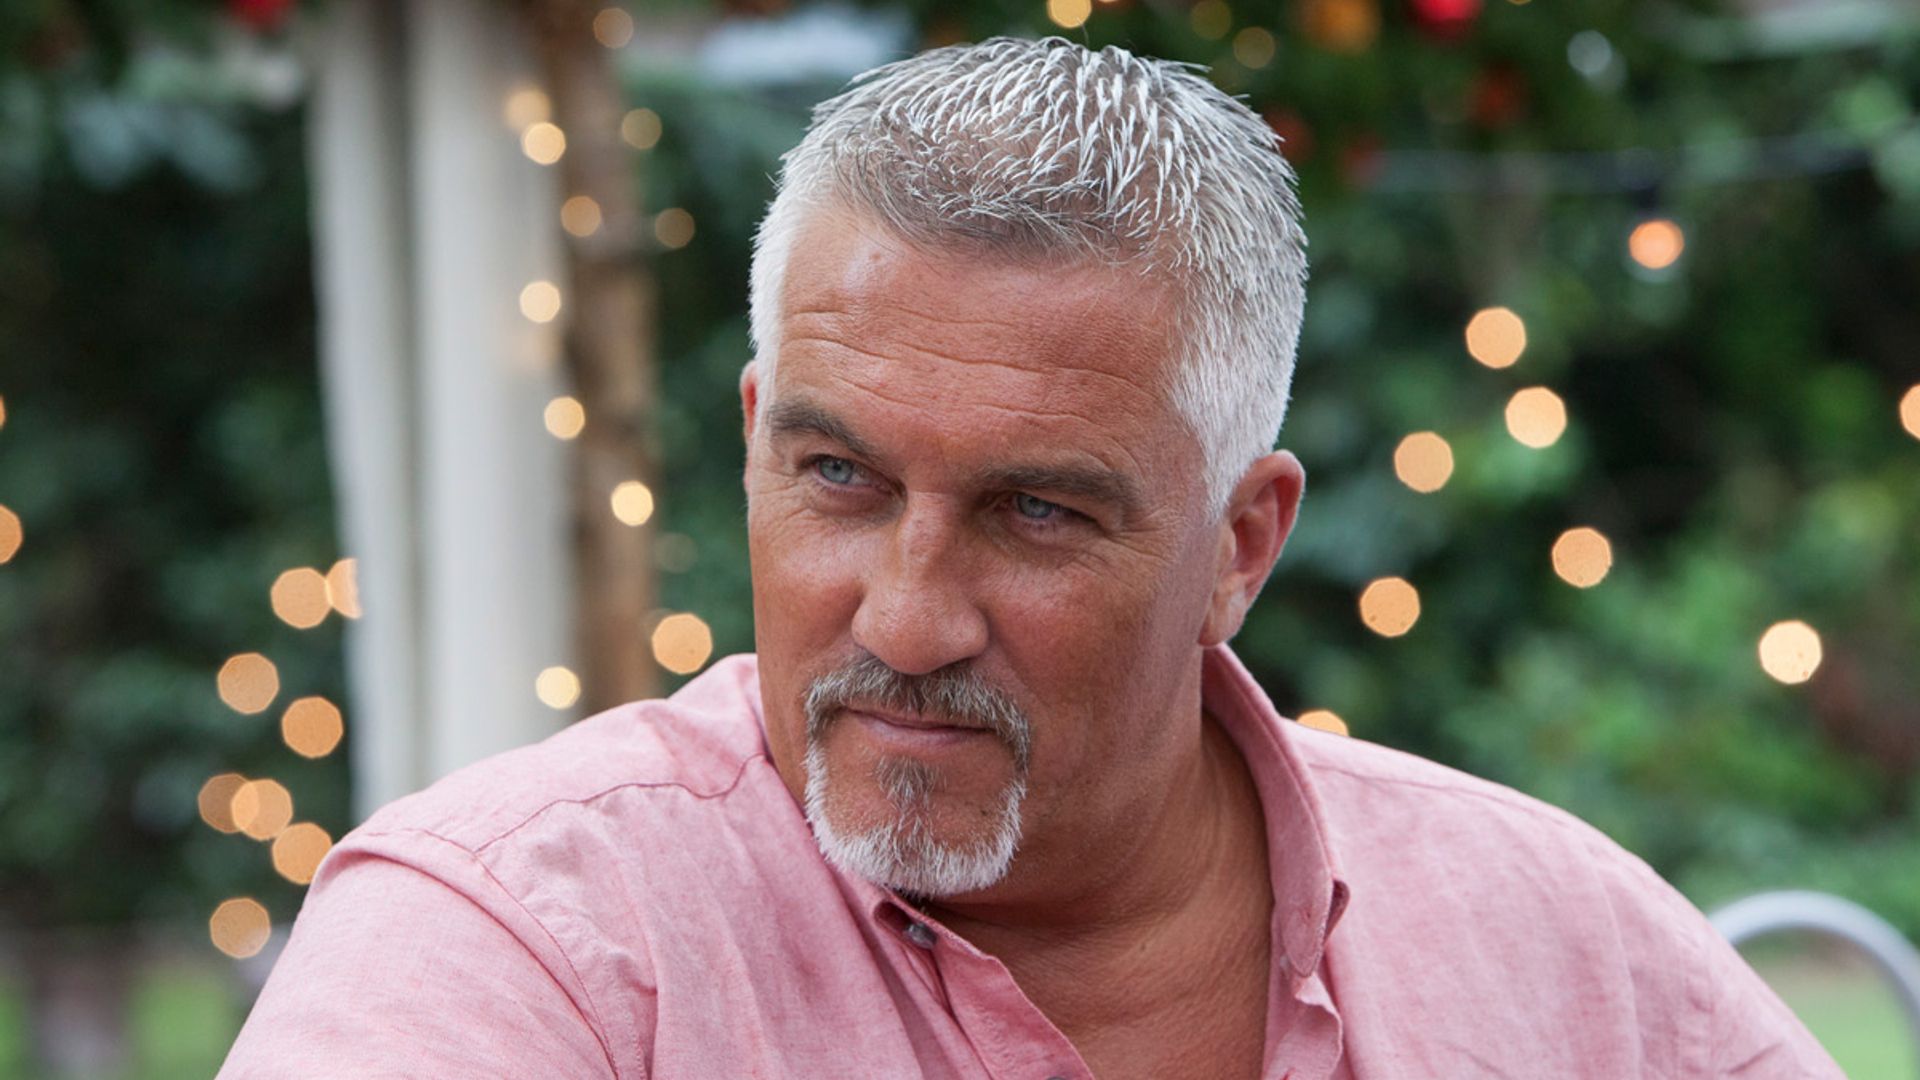 Bake Off's Paul Hollywood looks completely different without famous beard!